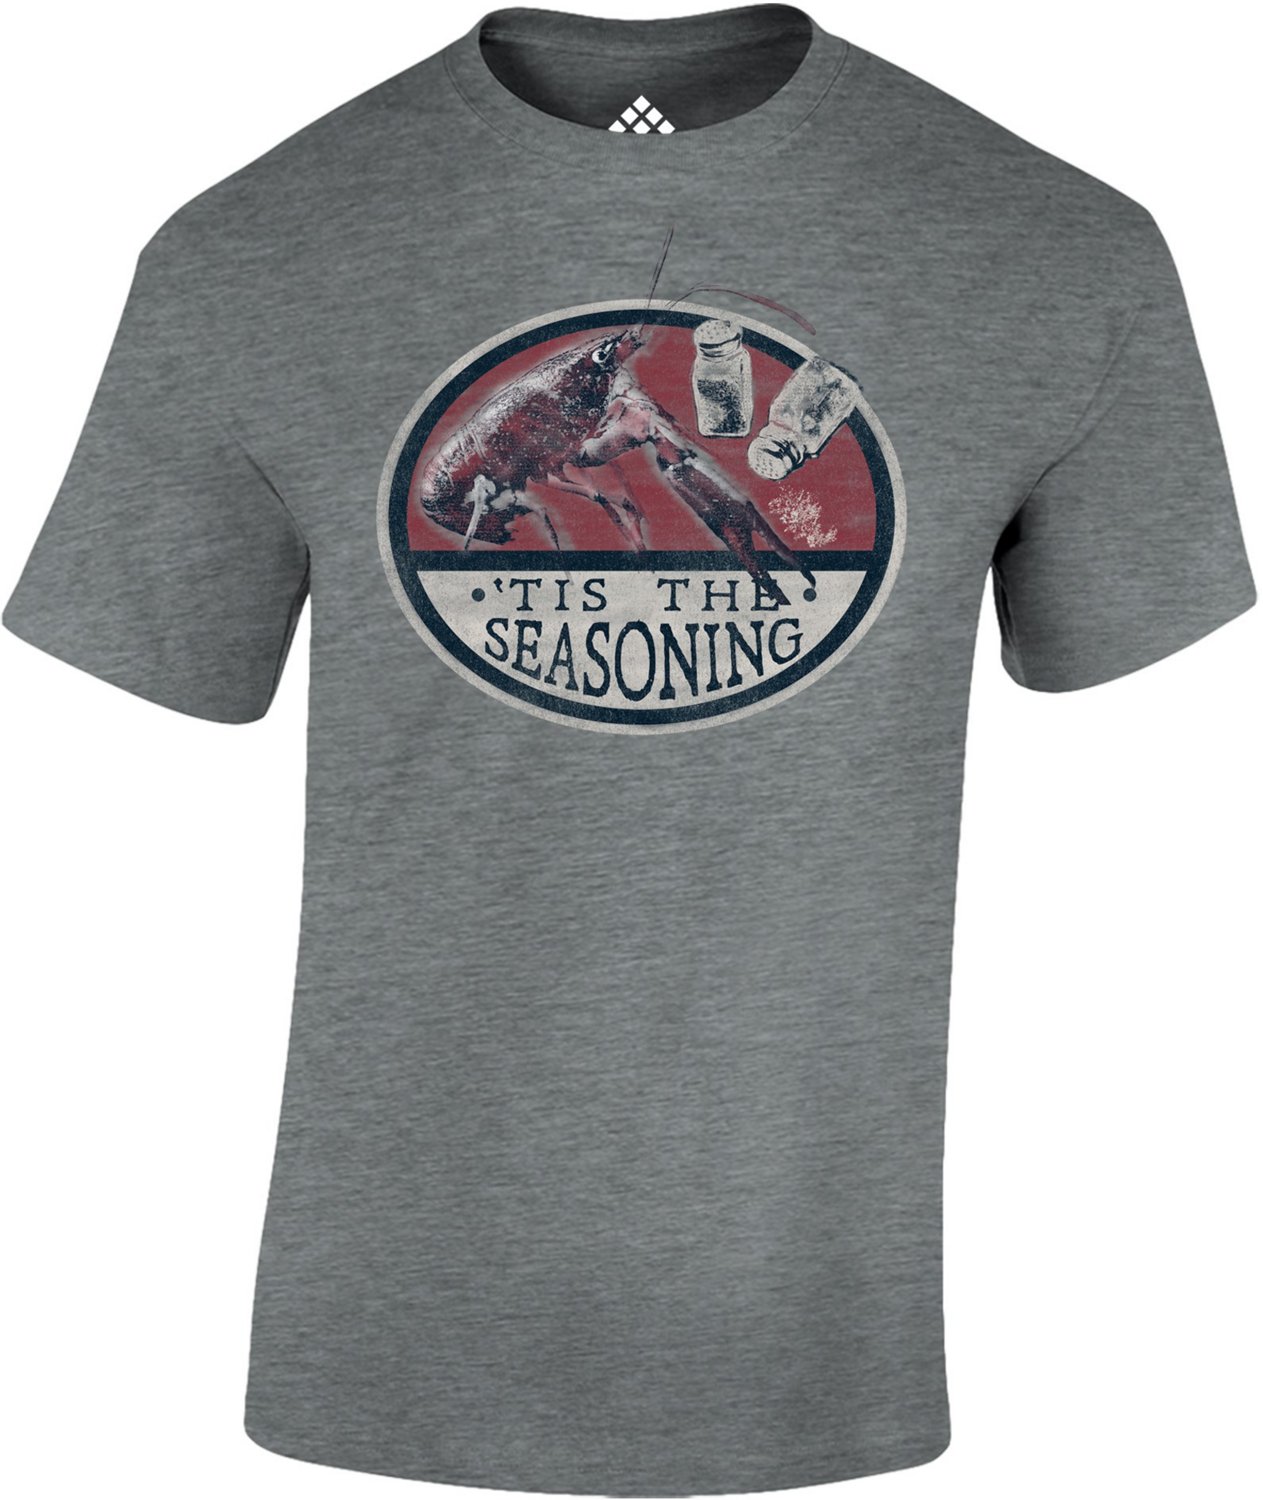 Academy Sports + Outdoor Men's Tis The Seasoning Graphic T-shirt | Academy